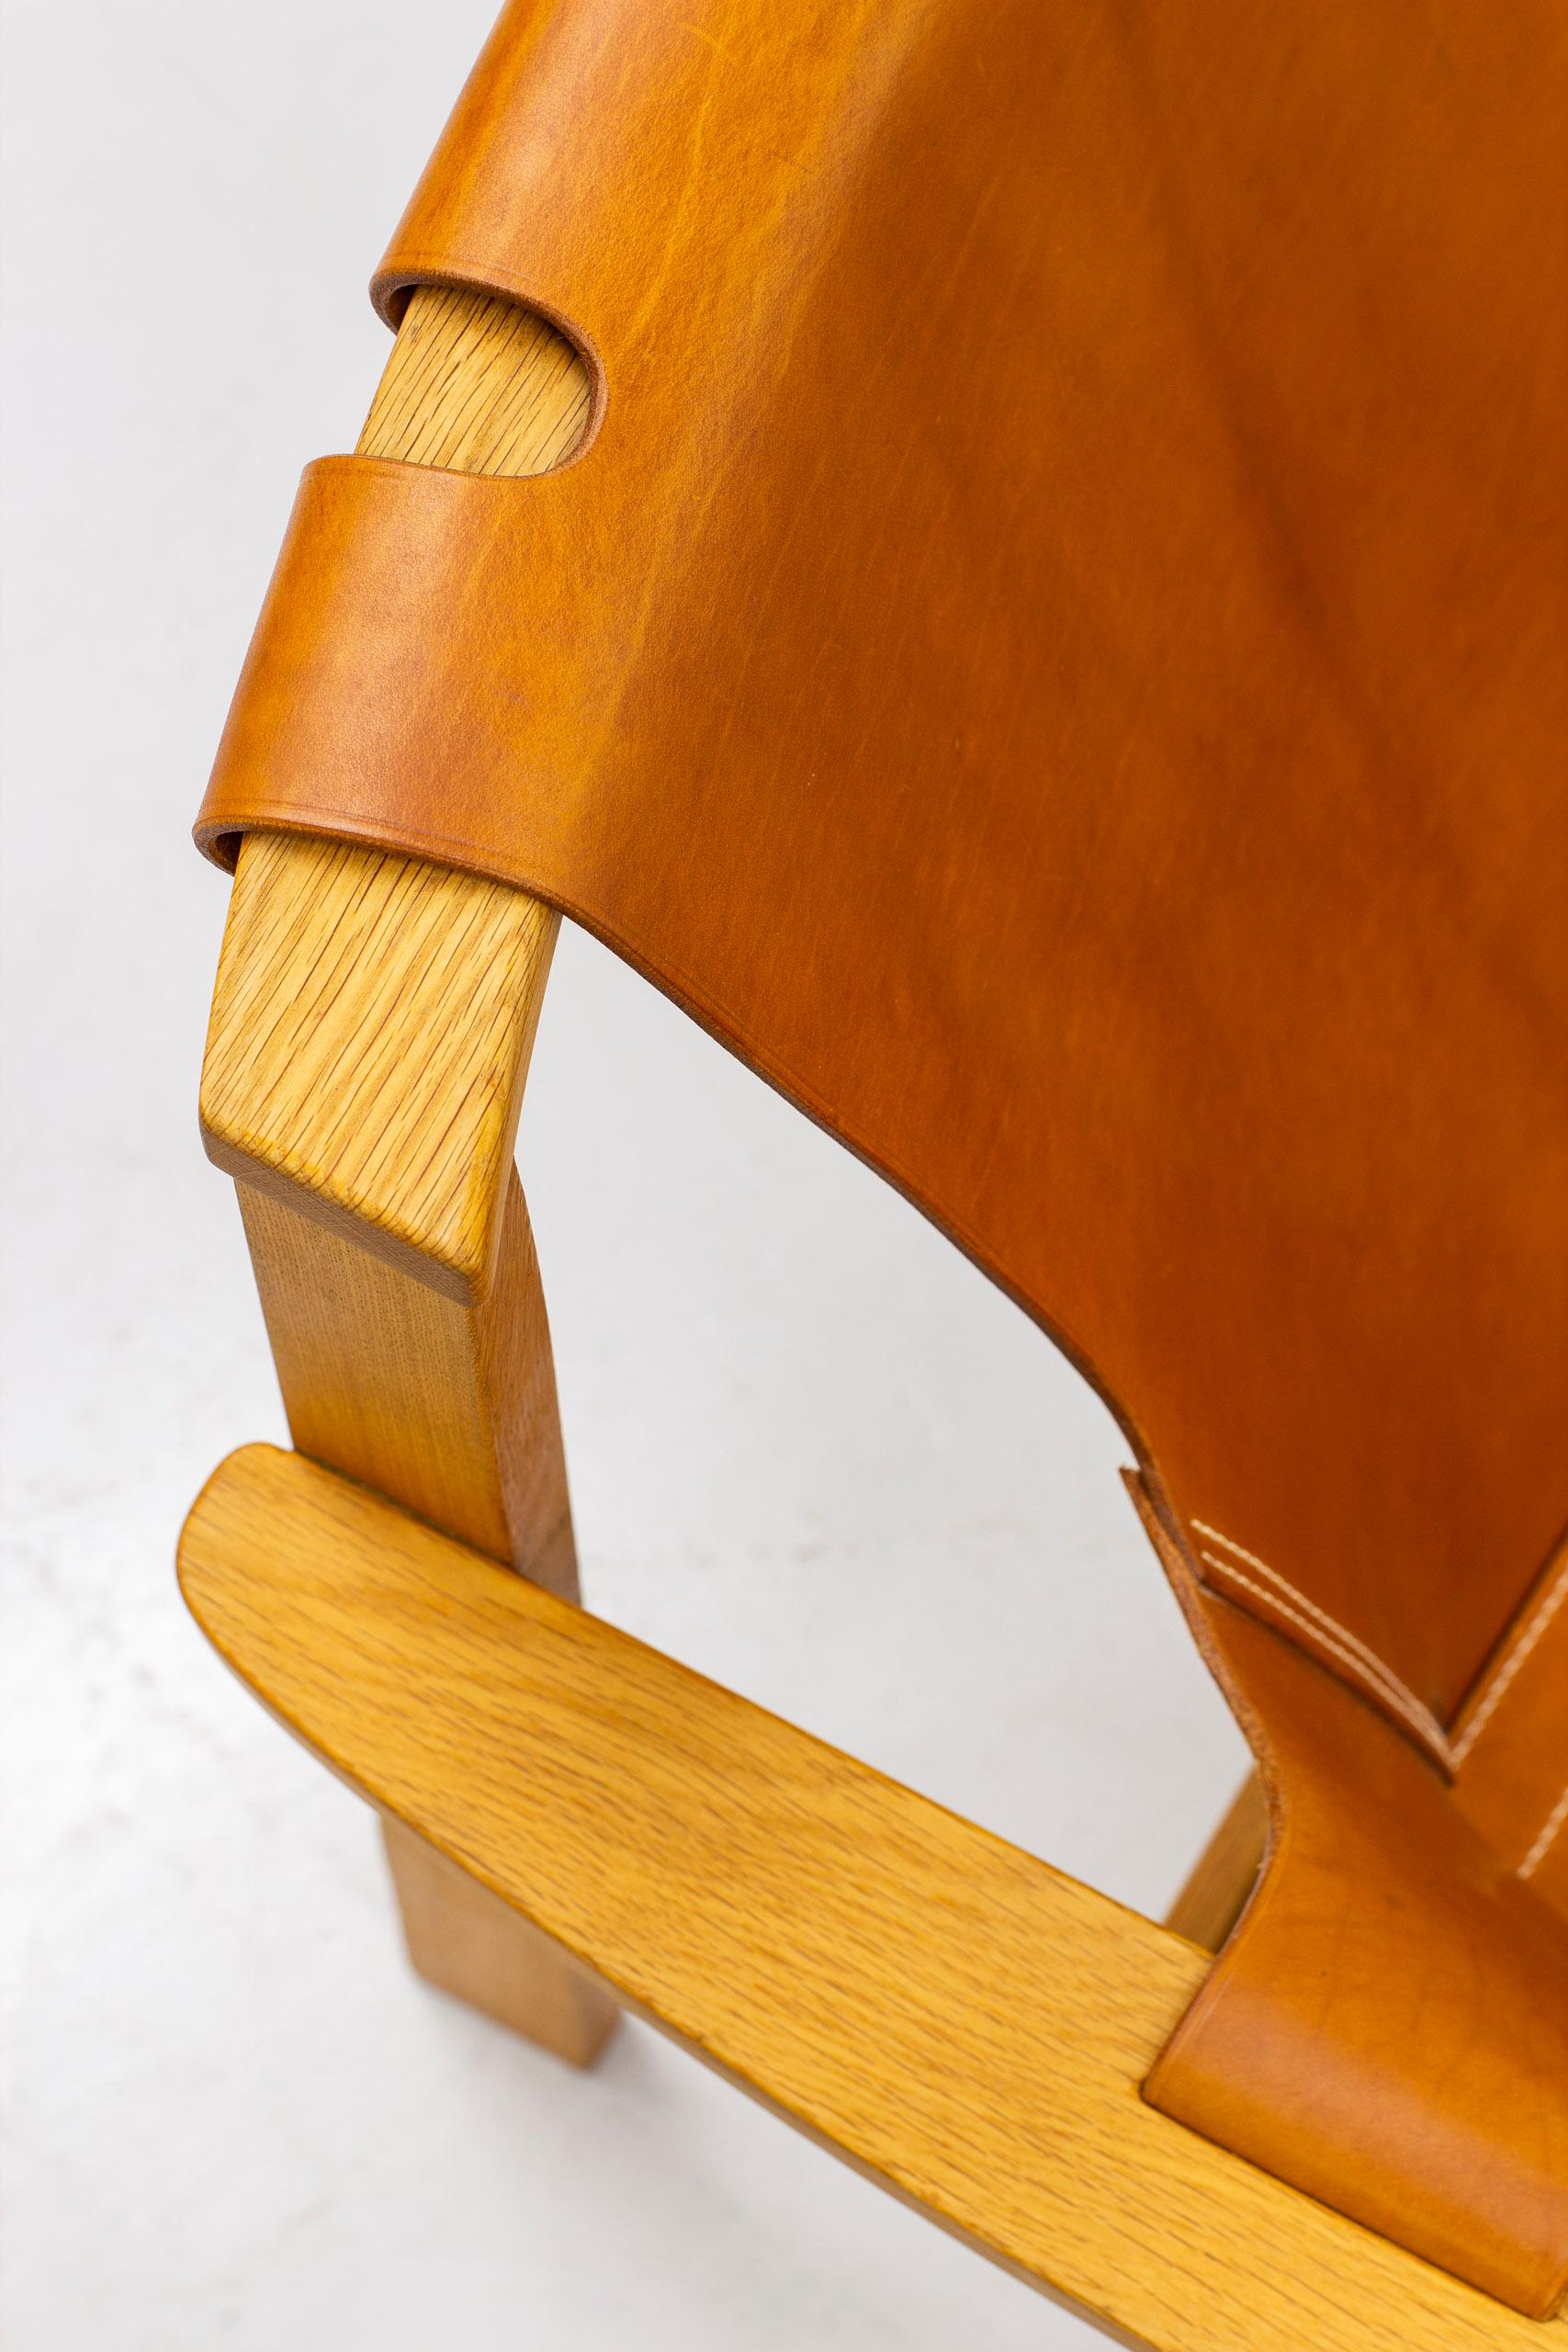 Mid-20th Century Lounge Chairs in Oak and Leather by Carl-Axel Acking, Nk, Nordiska Kompaniet